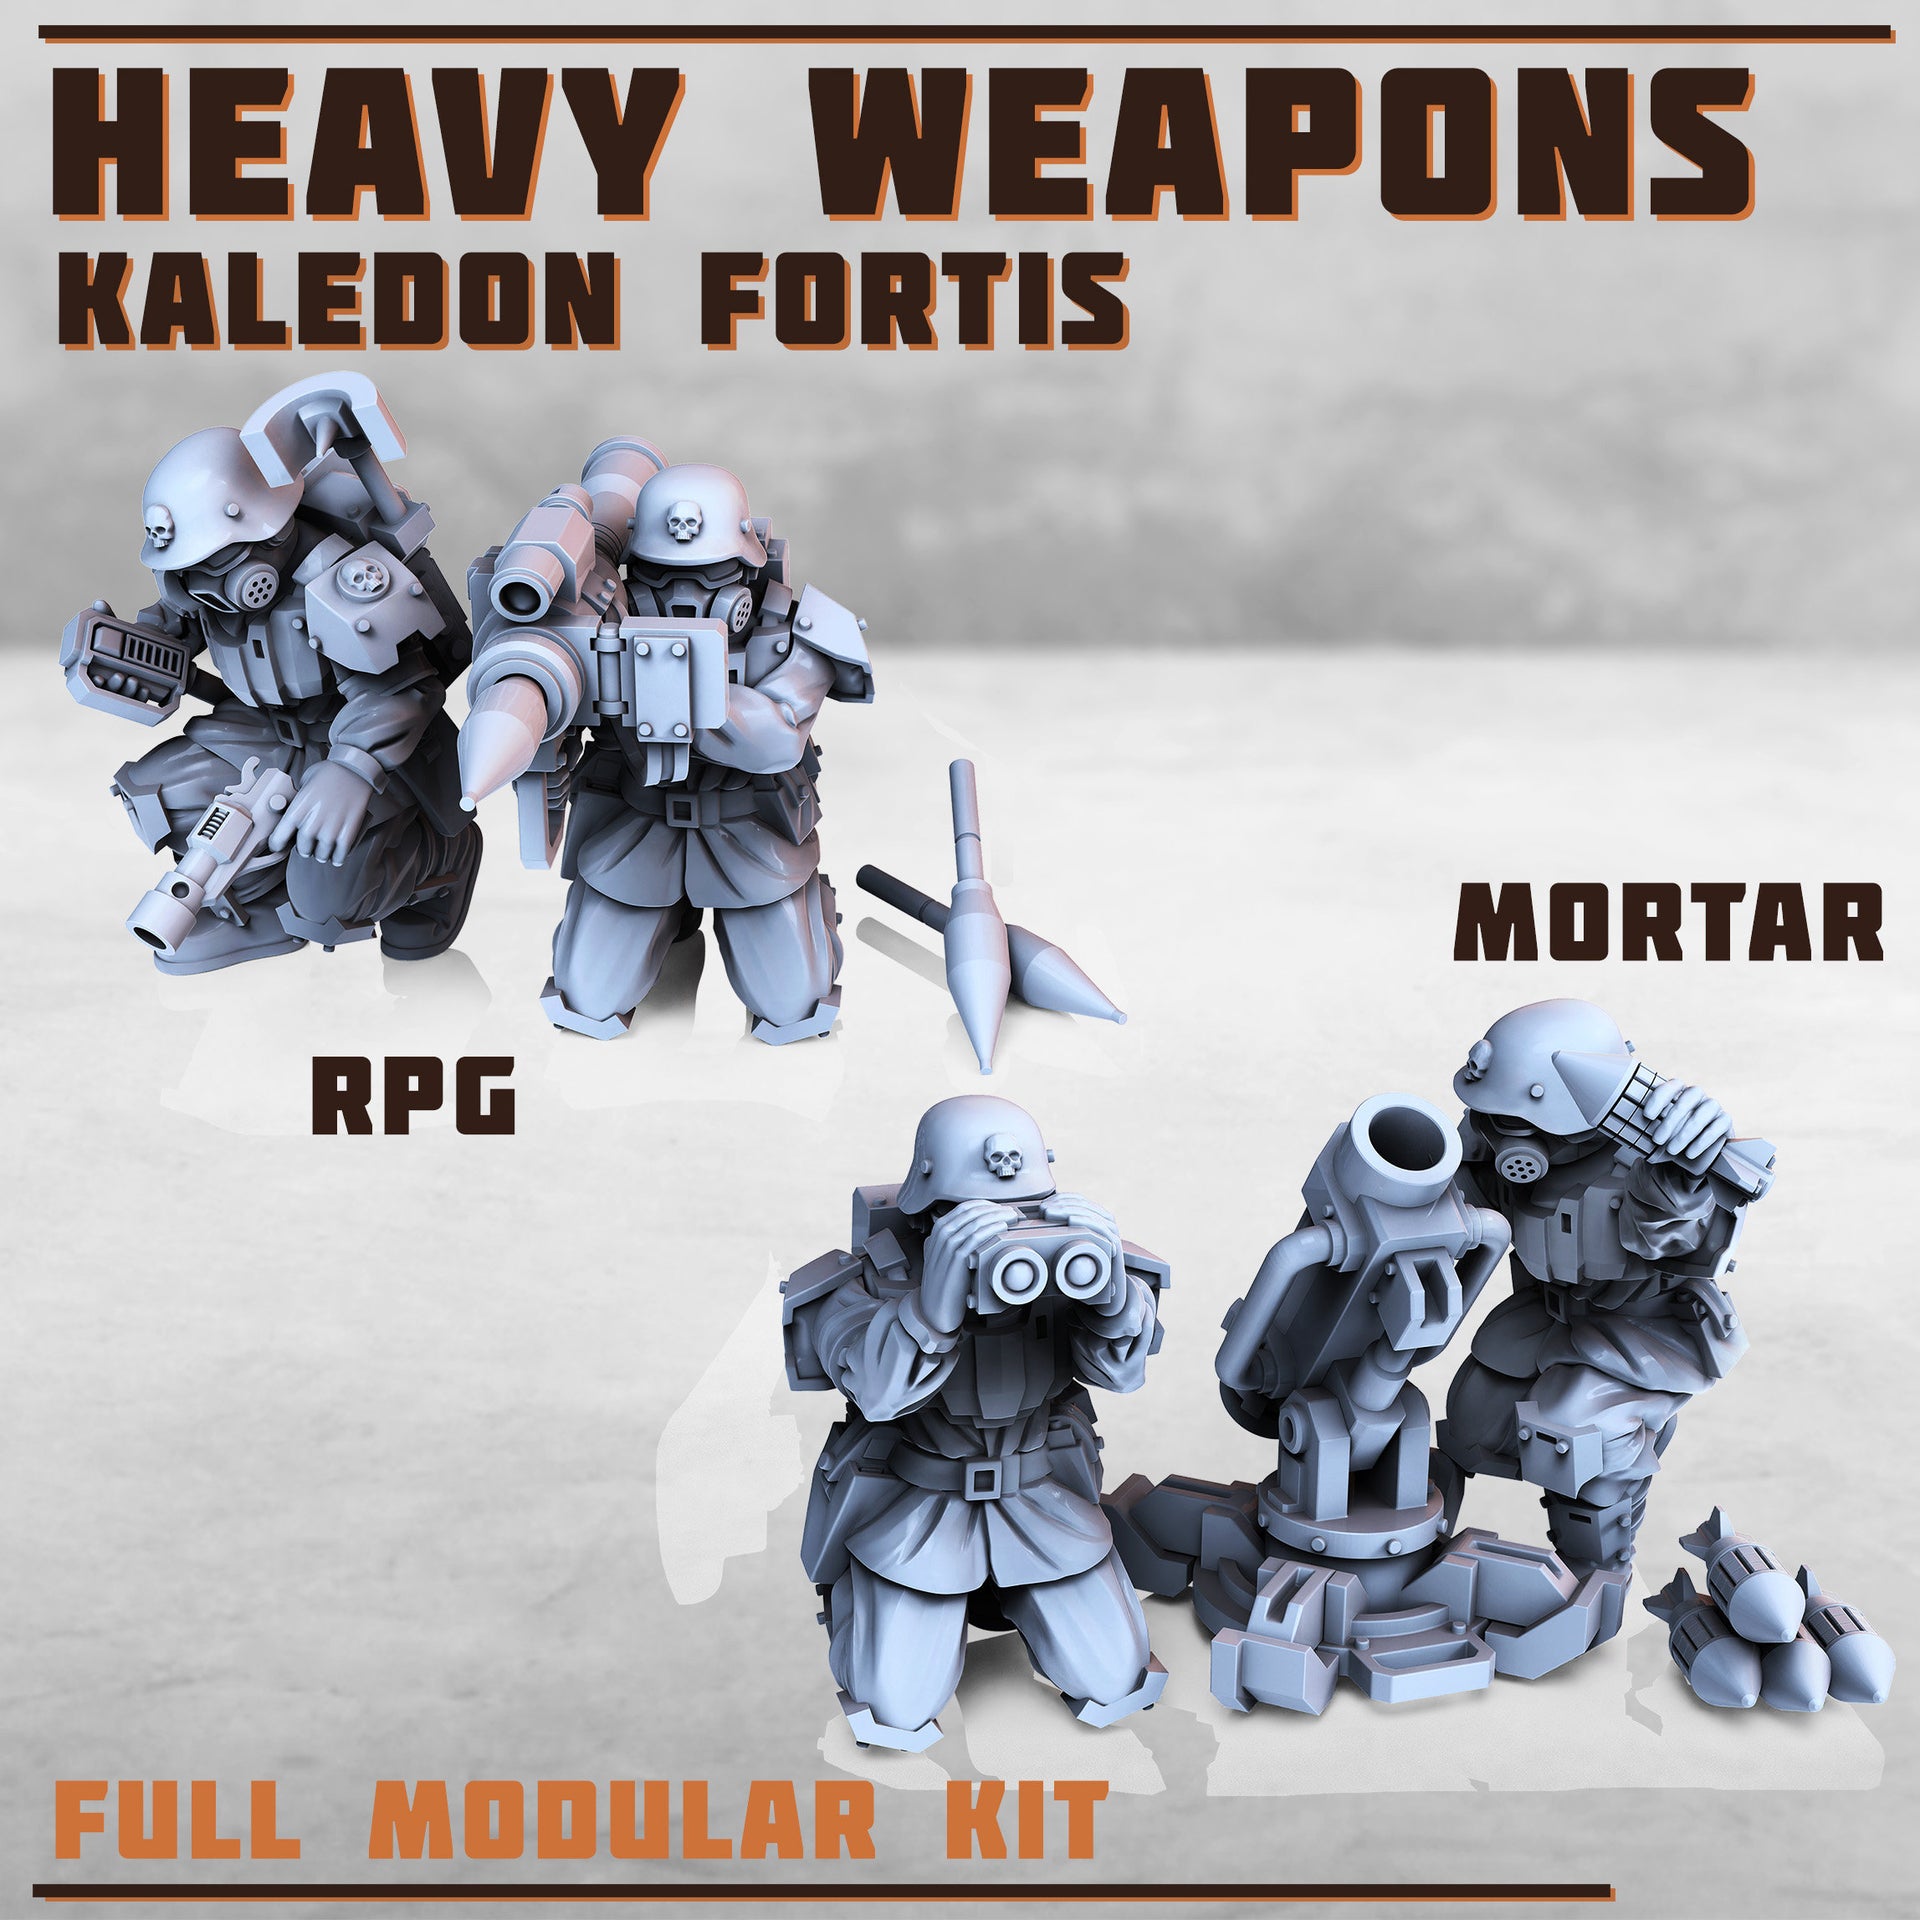 Kaledon Fortis Heavy Weapons Squad - Print Minis | Sci Fi | Light Infantry | Imperial | 28mm Heroic